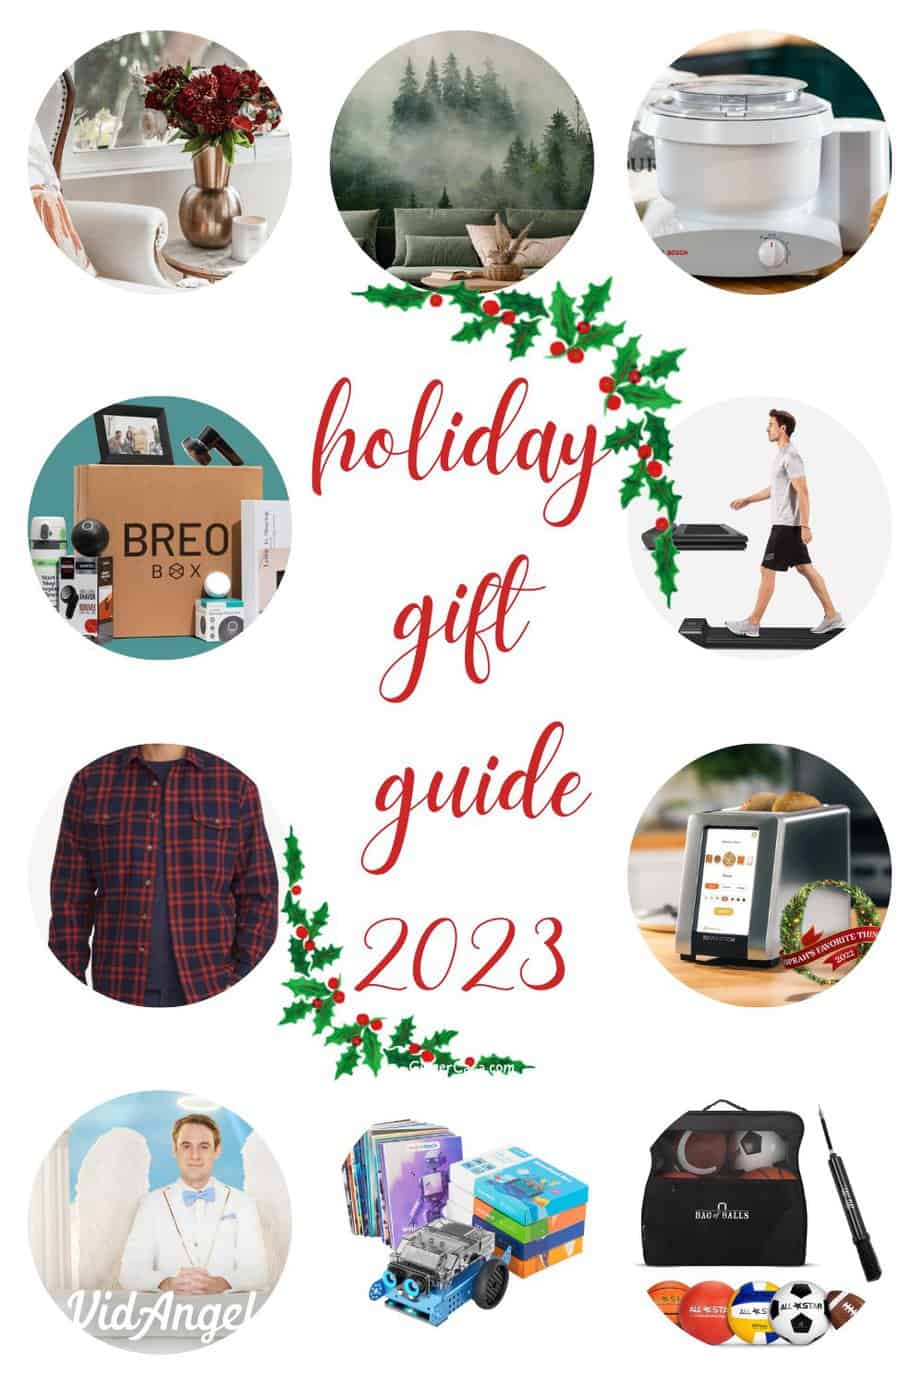 gift ideas for the 2023 holiday season